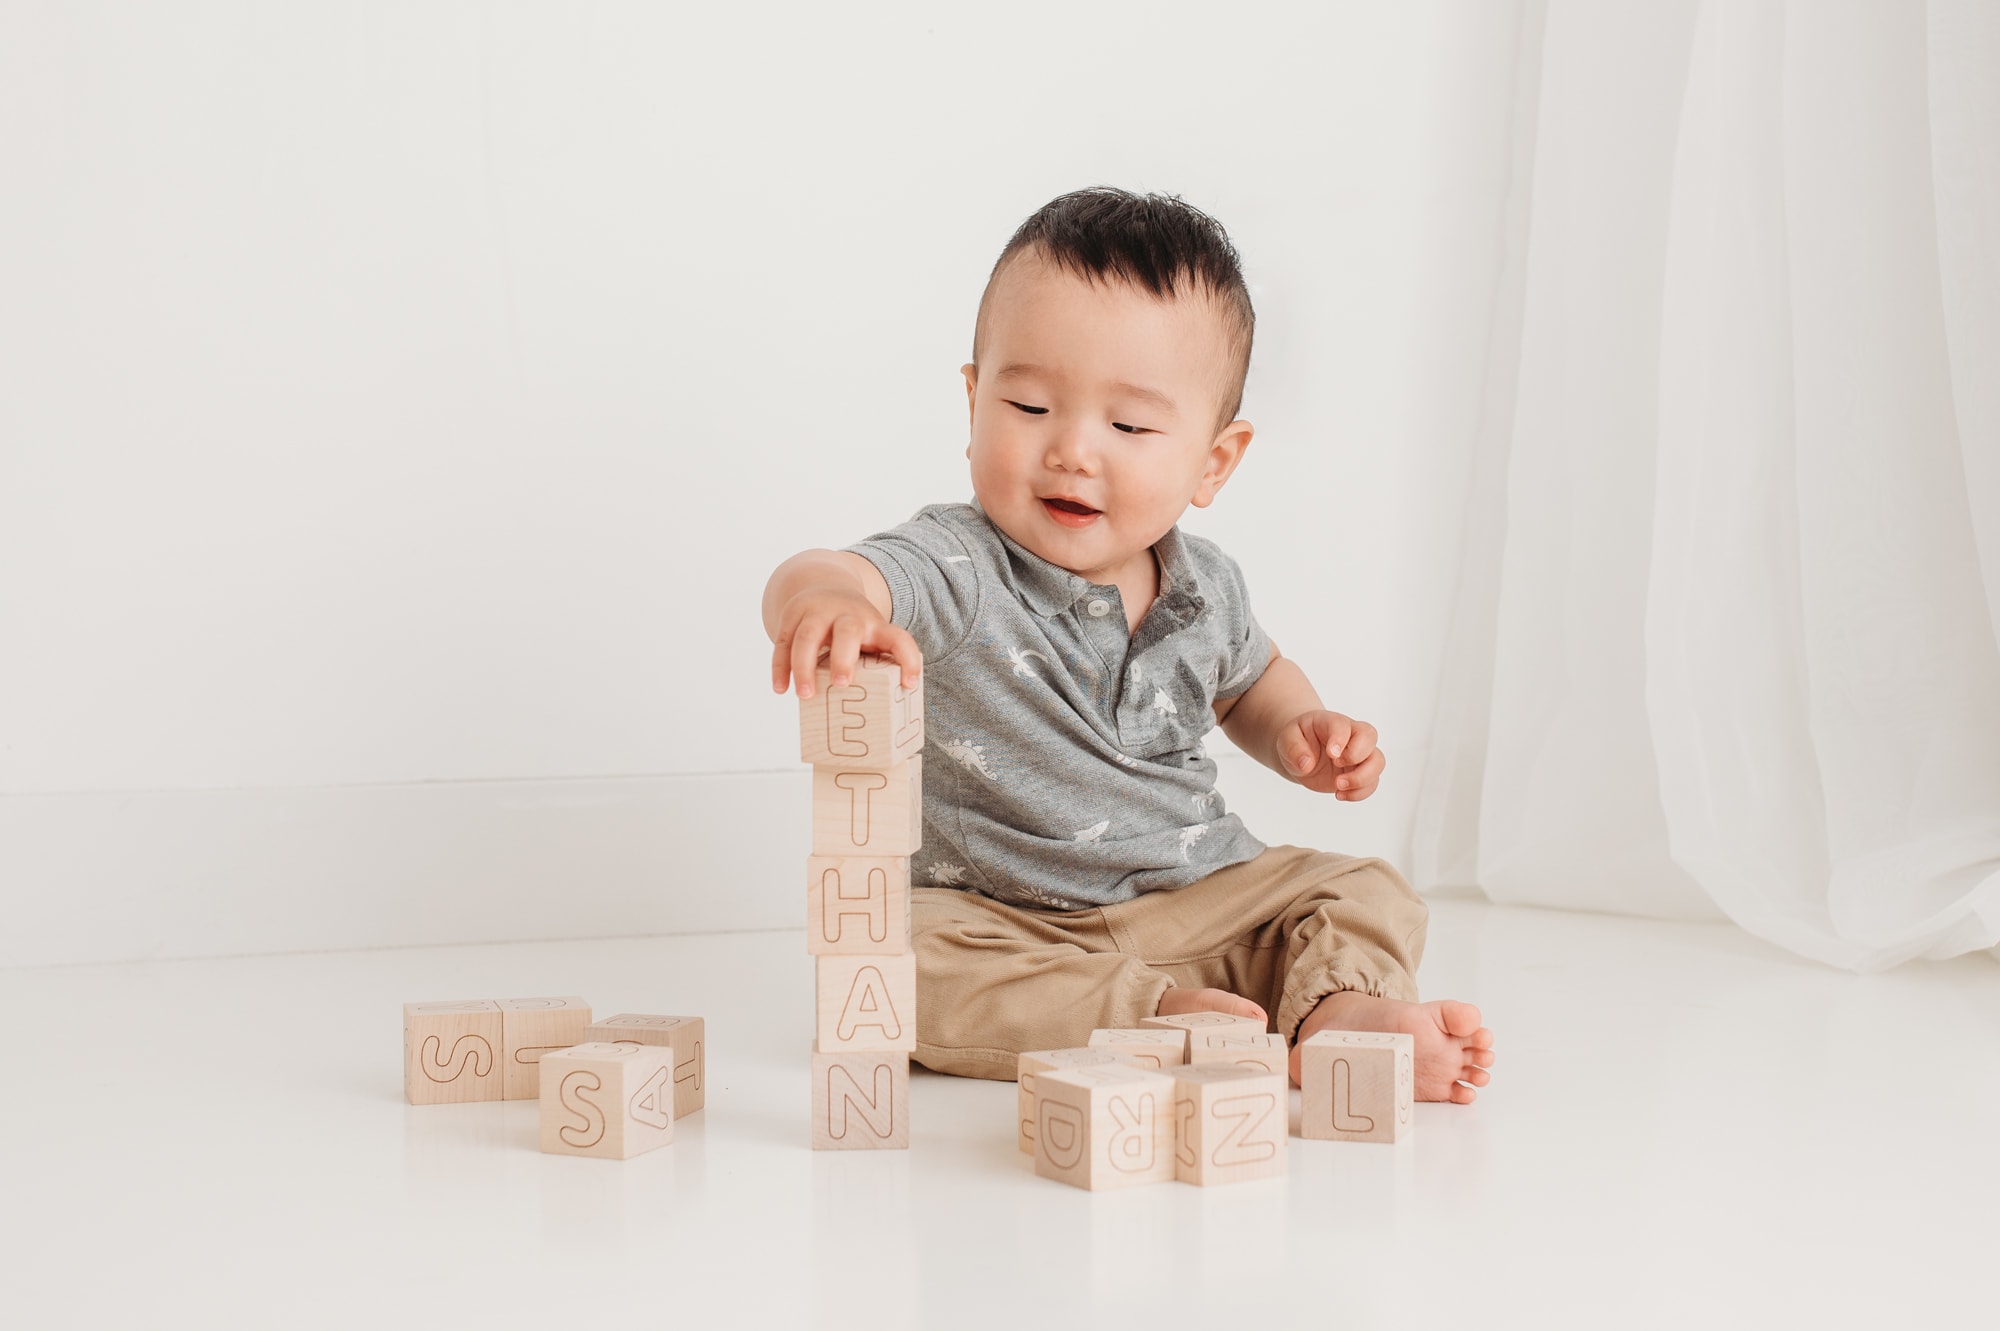 Big baby session with child spelling his name in blocks.